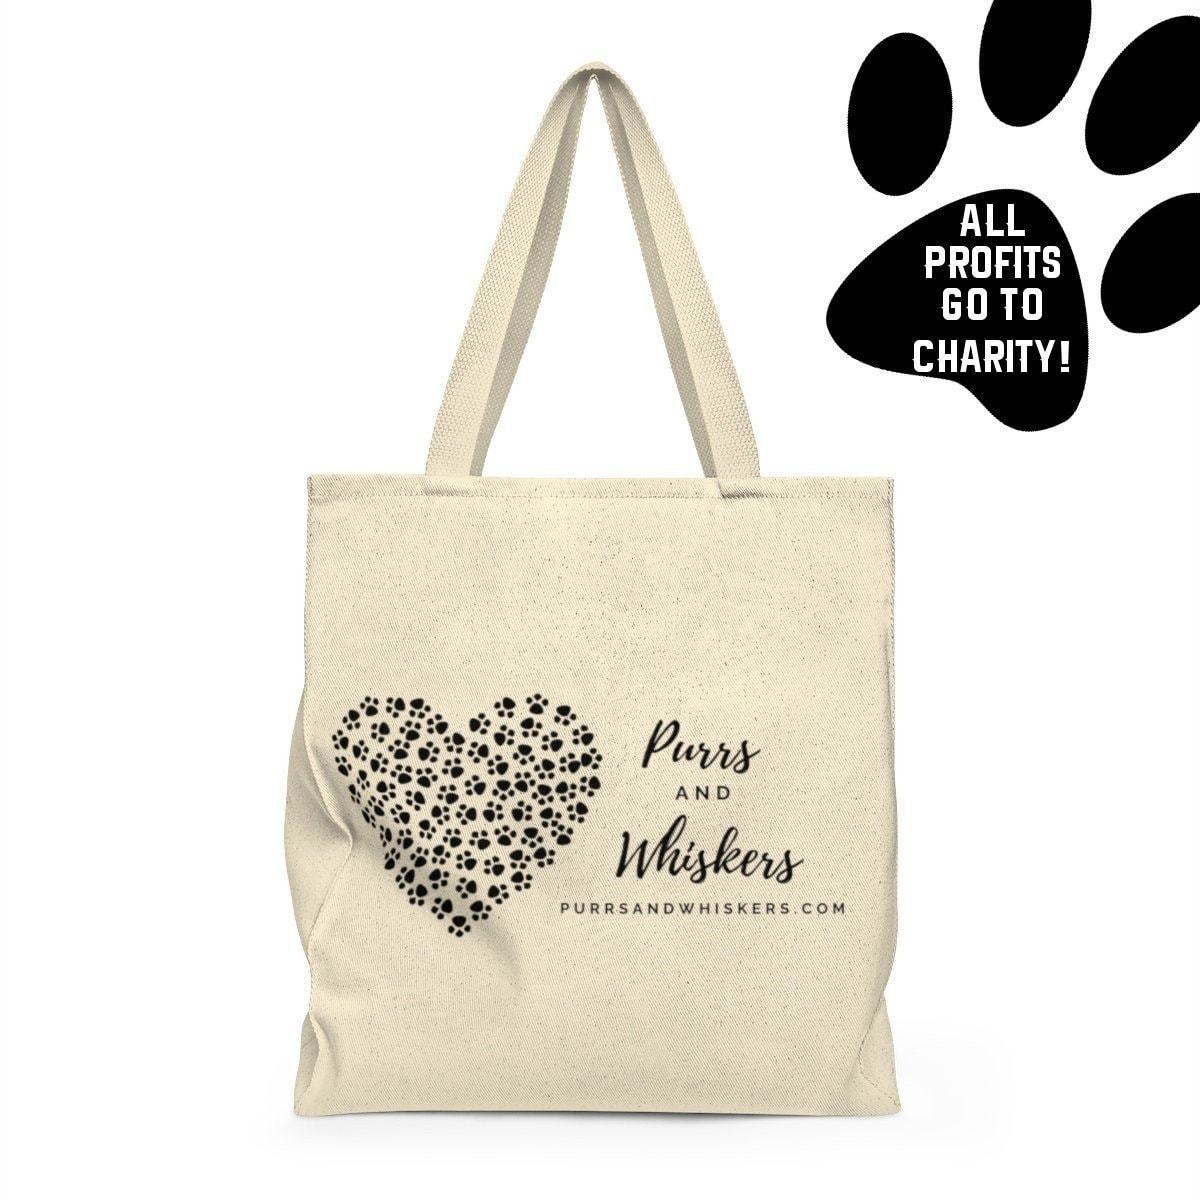 Cat Tote Bag, All Profits Go to Help Our Local Animal Center